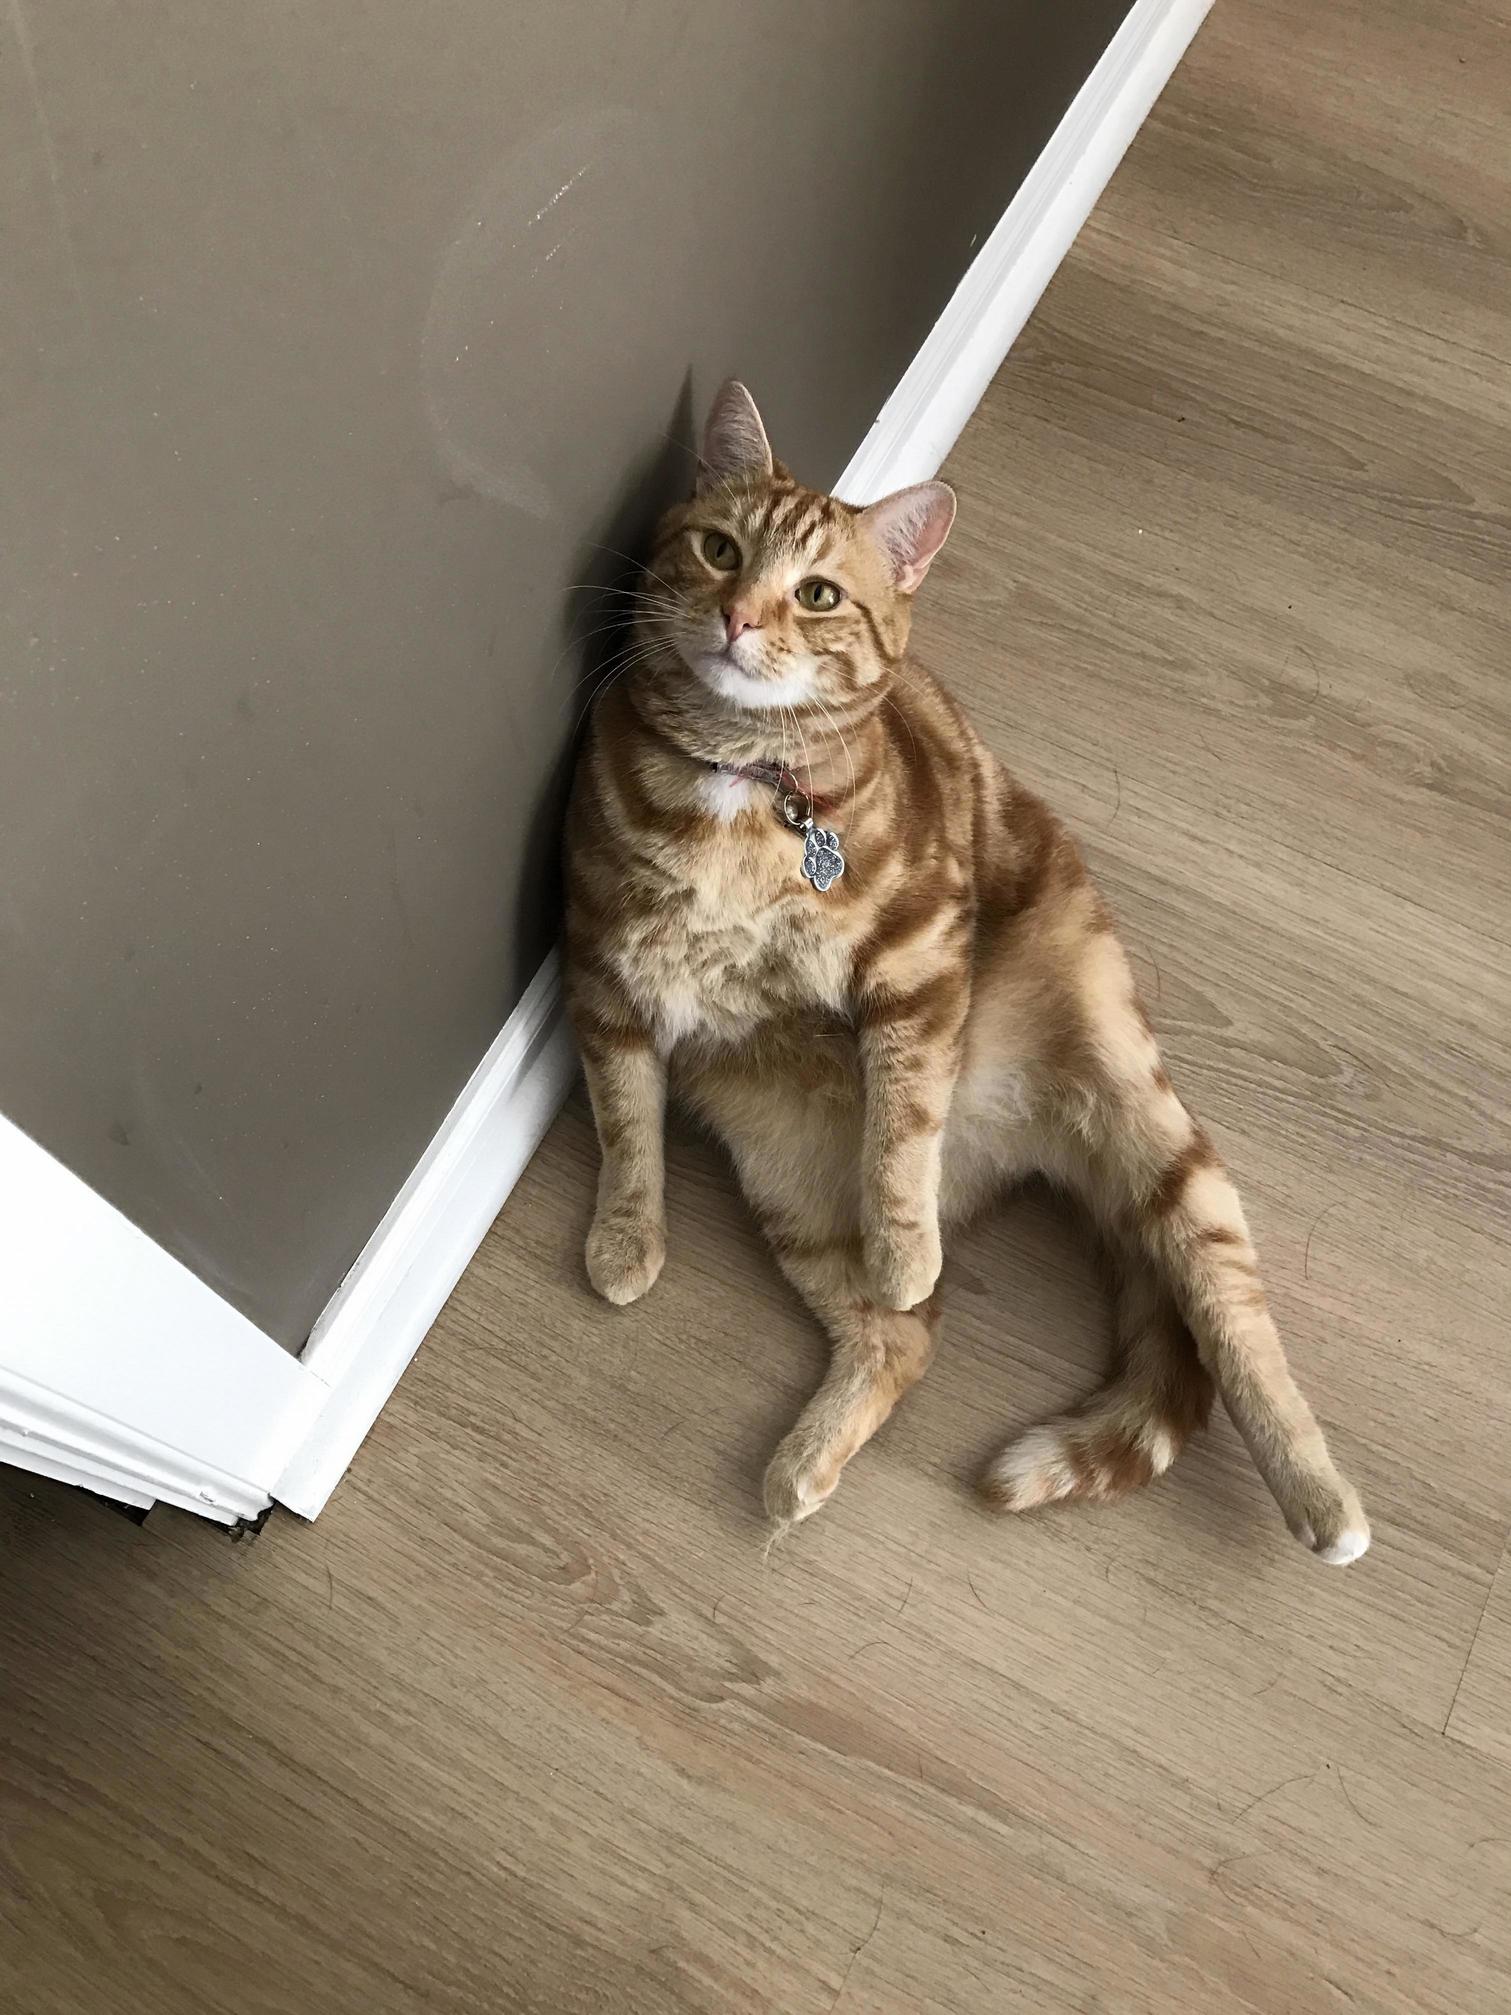 My cat tries to sit like a human sometimes.